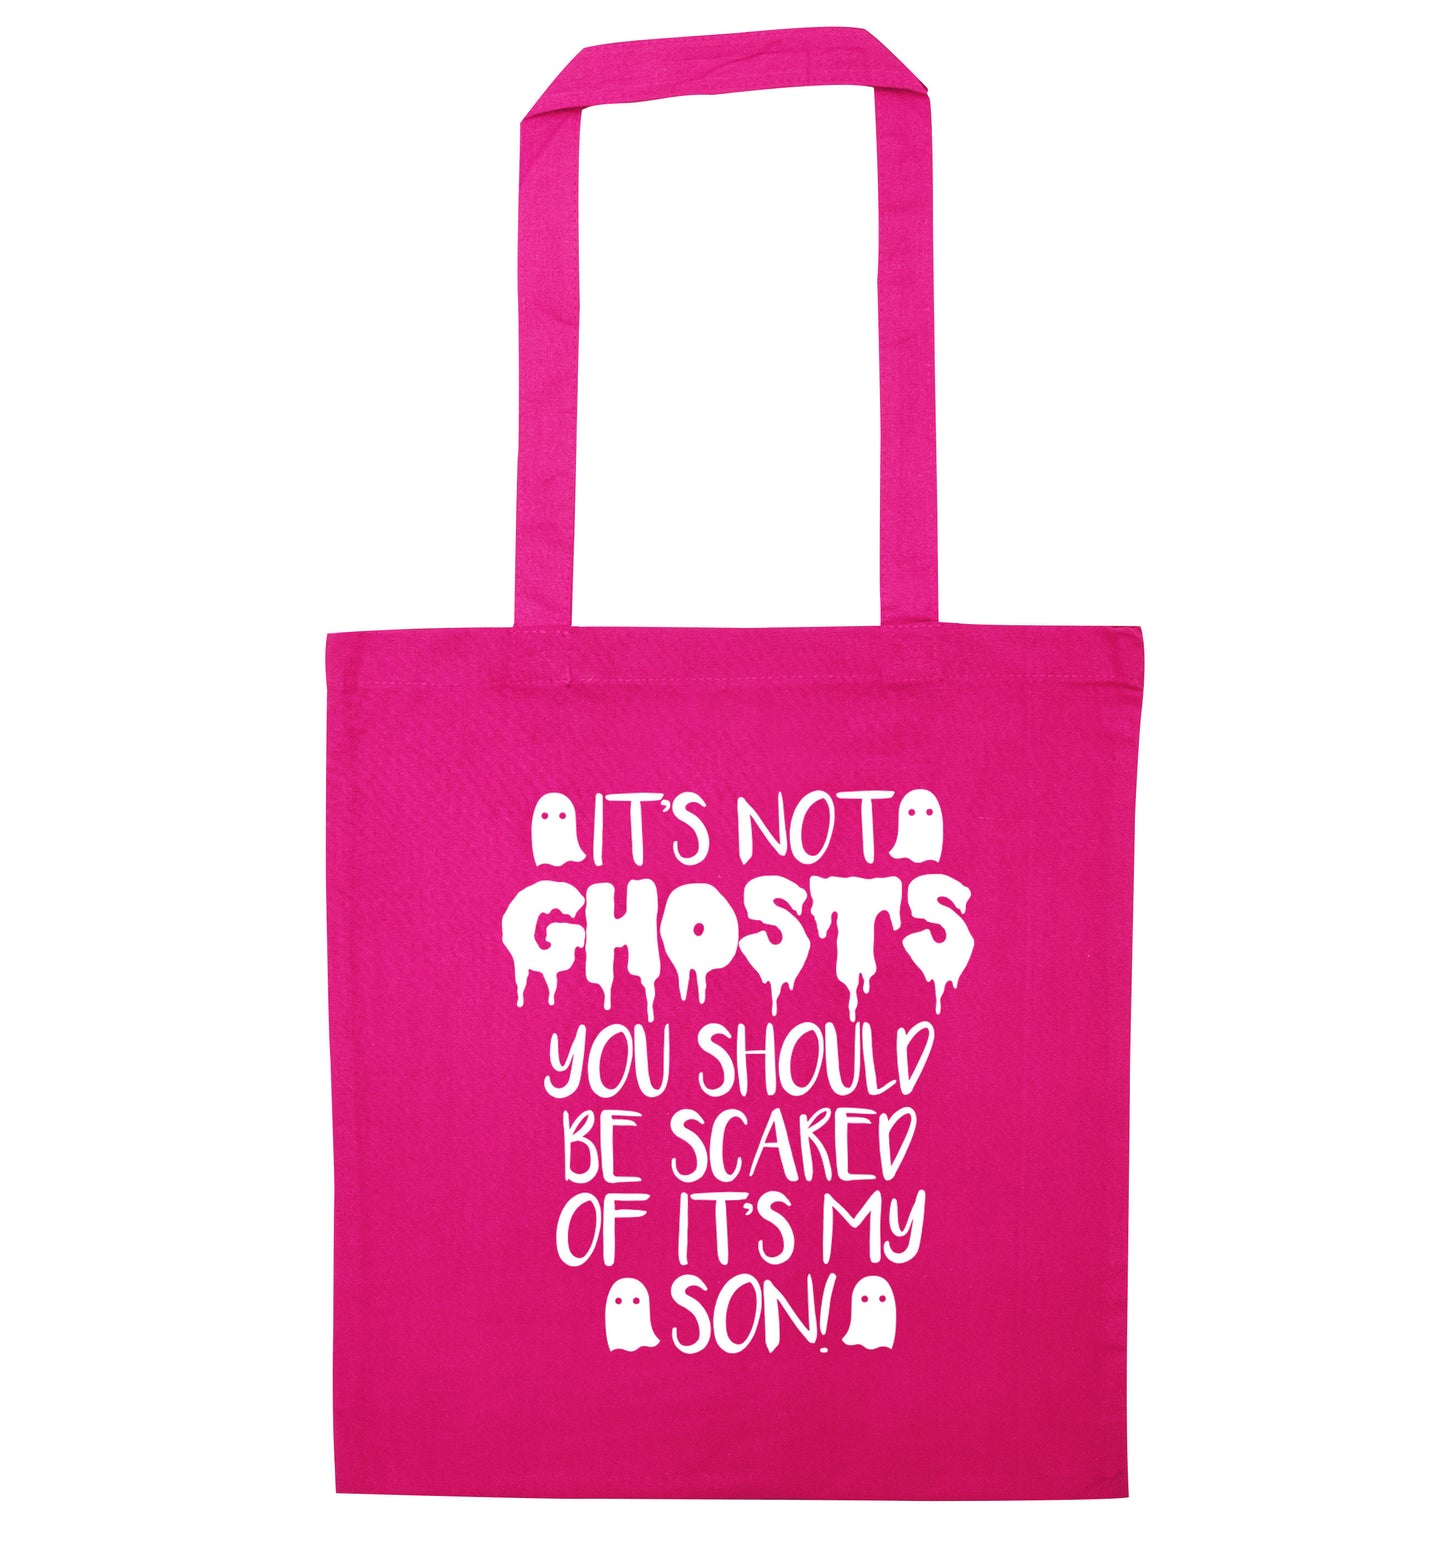 It's not ghosts you should be scared of it's my son! pink tote bag